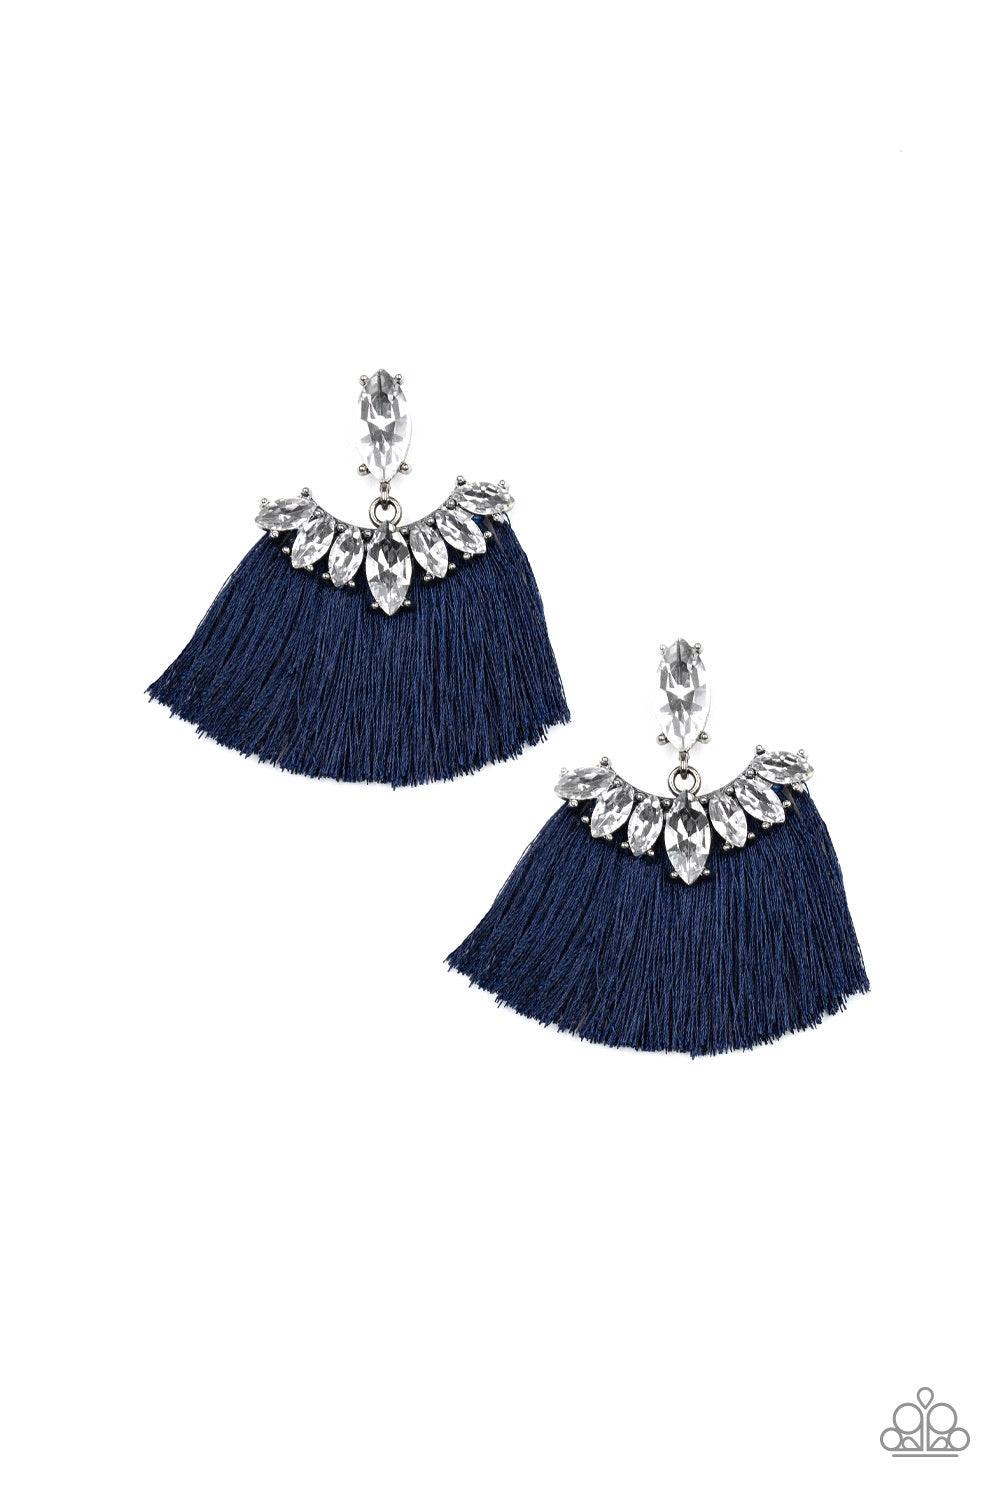 Paparazzi Accessories Formal Flaire - Blue A solitaire marquise -cut rhinestone gives way to a plume of shiny blue thread crowned in a matching rhinestone encrusted fringe for a glamorous look. Earring attaches to a standard post fitting. Jewelry